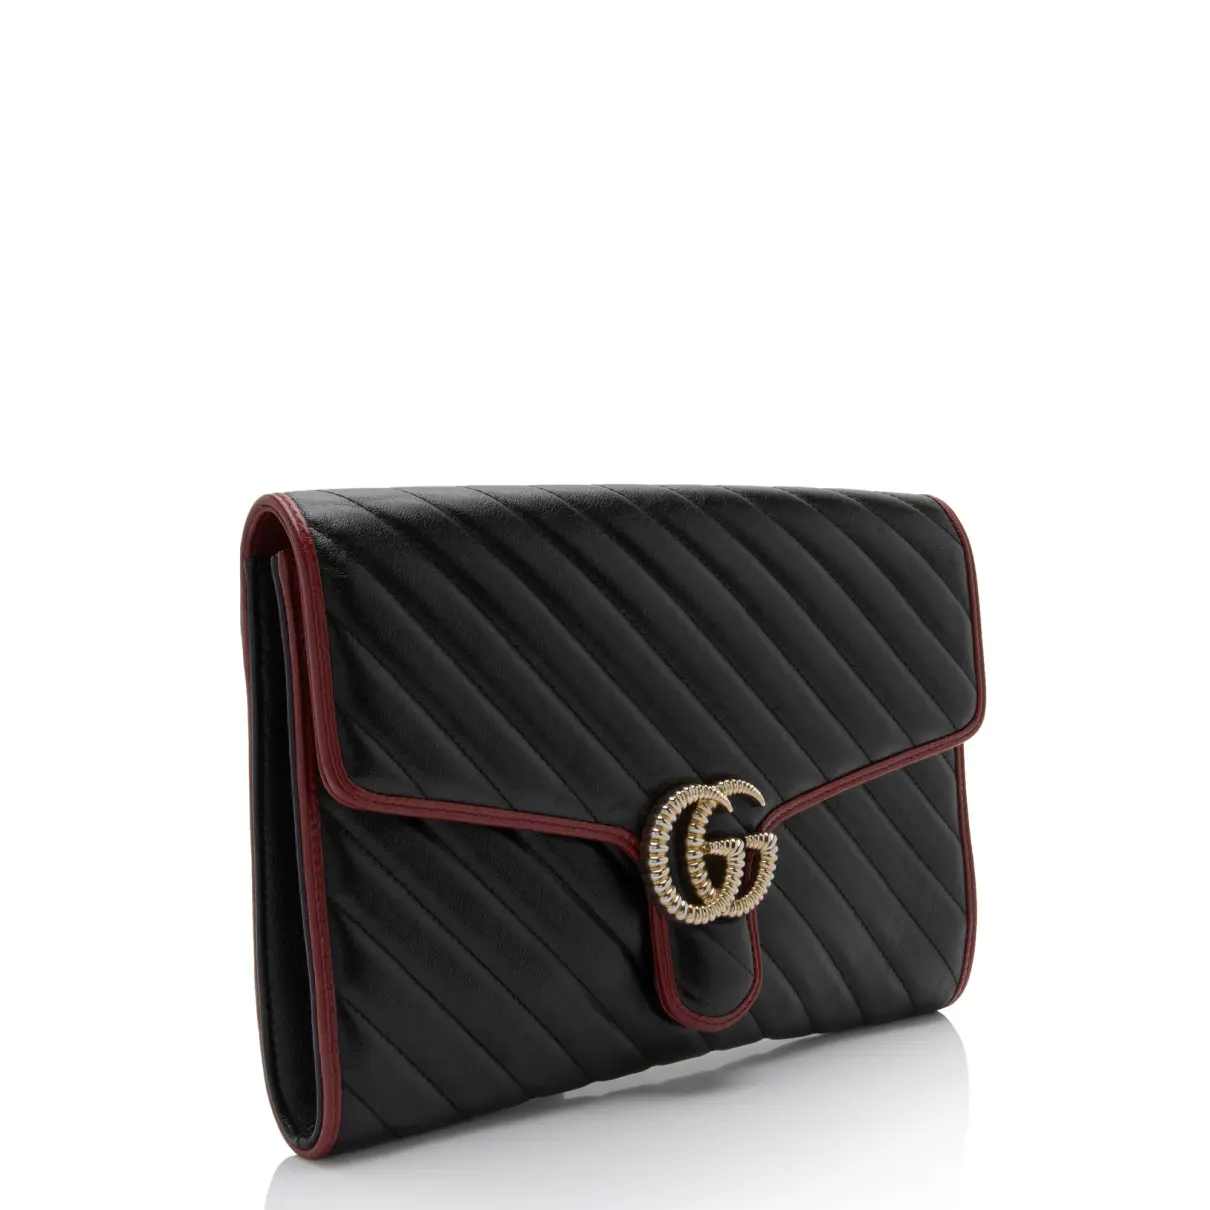 Buy Gucci Marmont leather clutch bag online